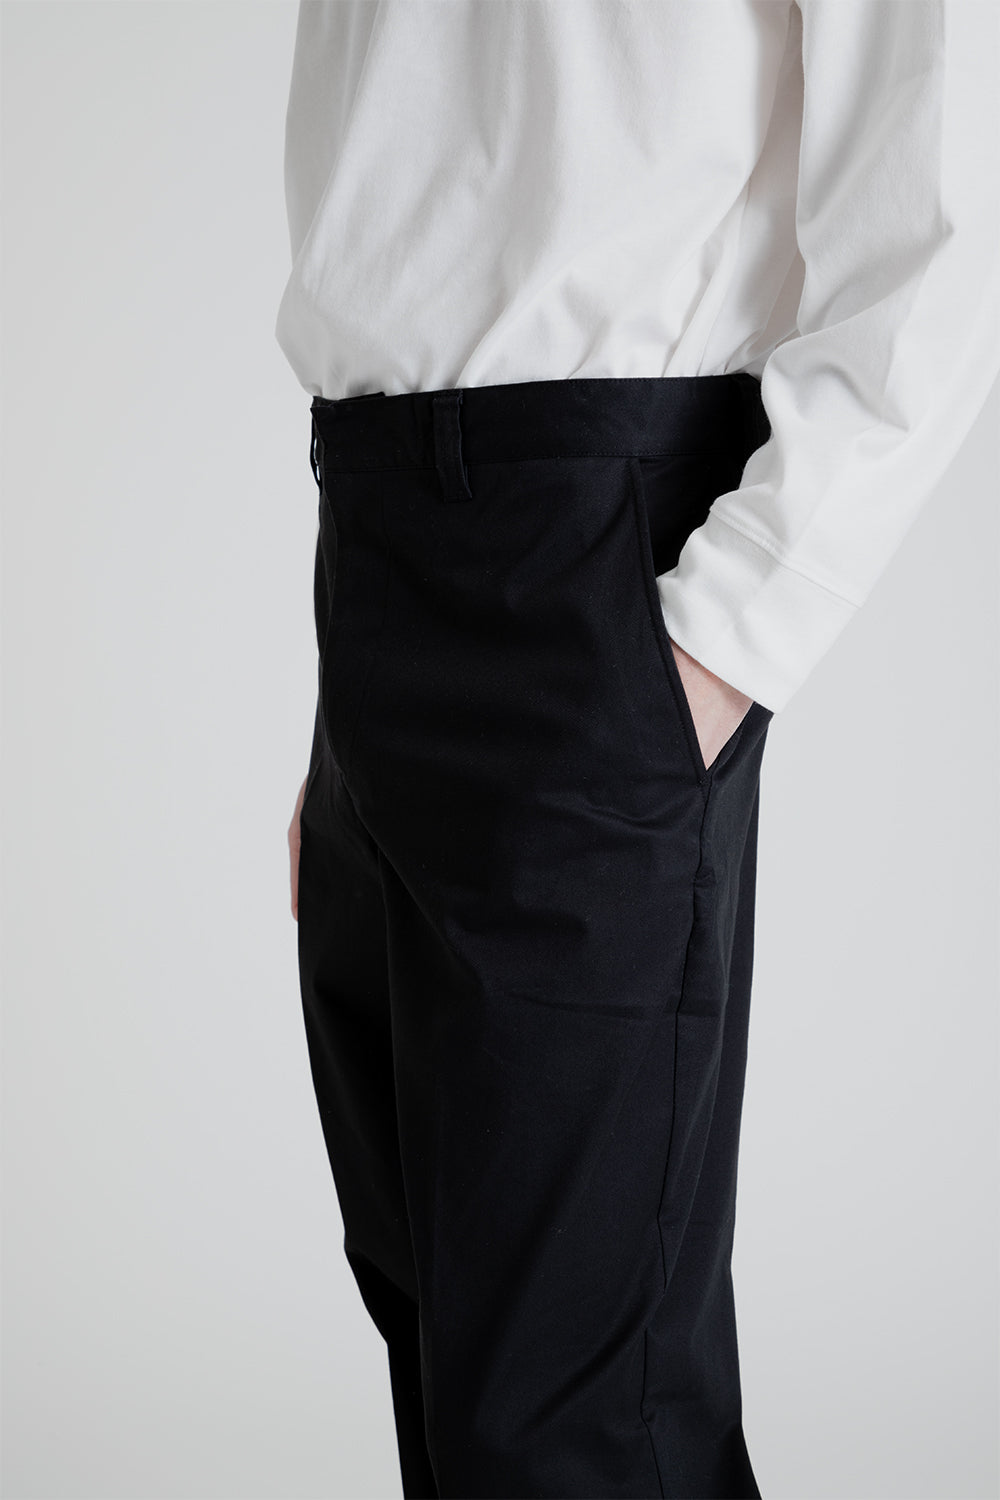 Adapture Relaxed Fit Chino Pants in Black